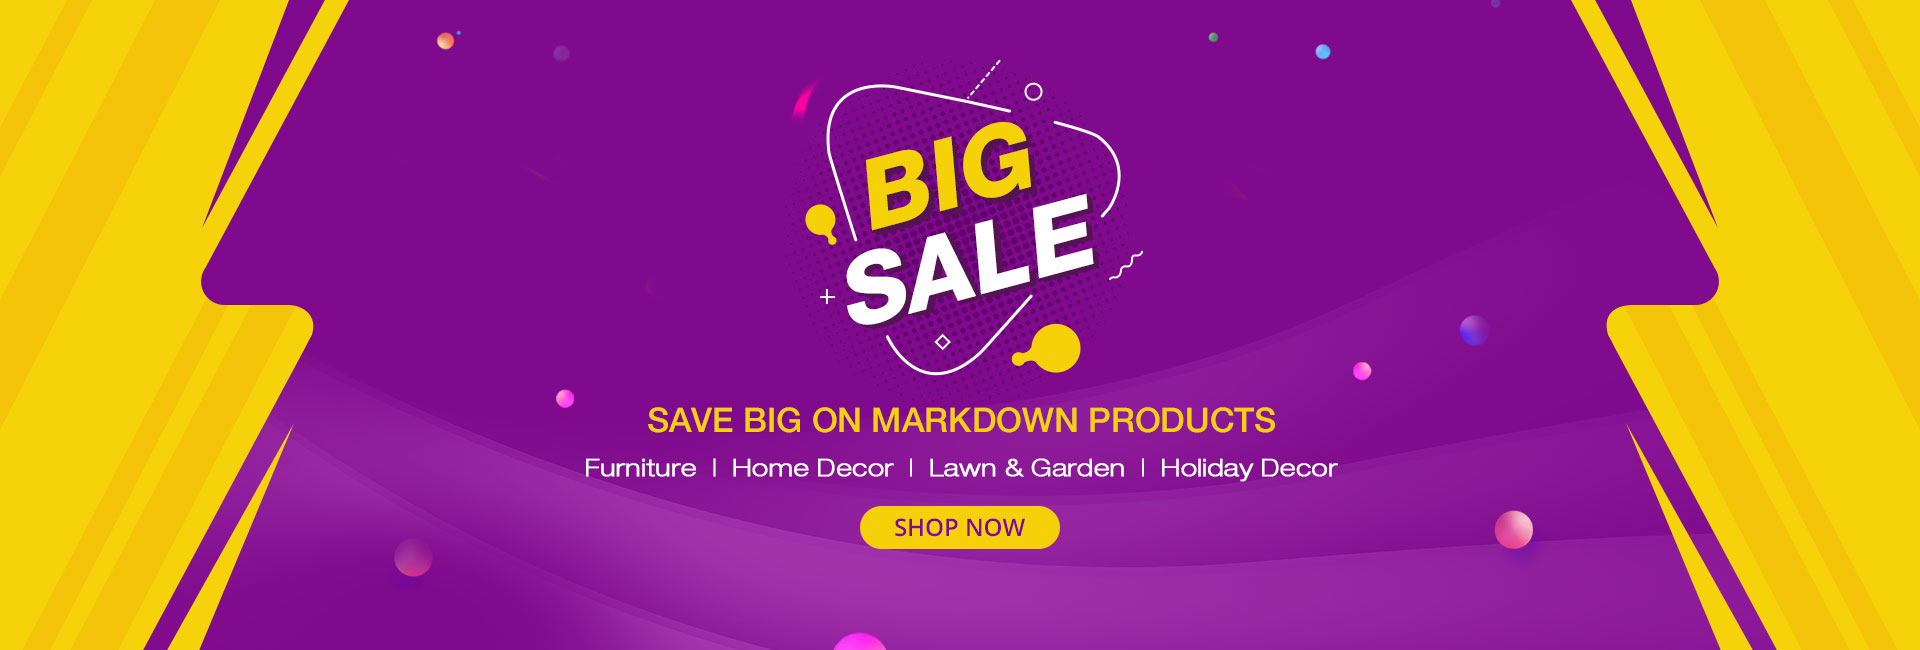 Big Sale for Furniture, Home Decor, Lawn & Garden and Holiday Decorations